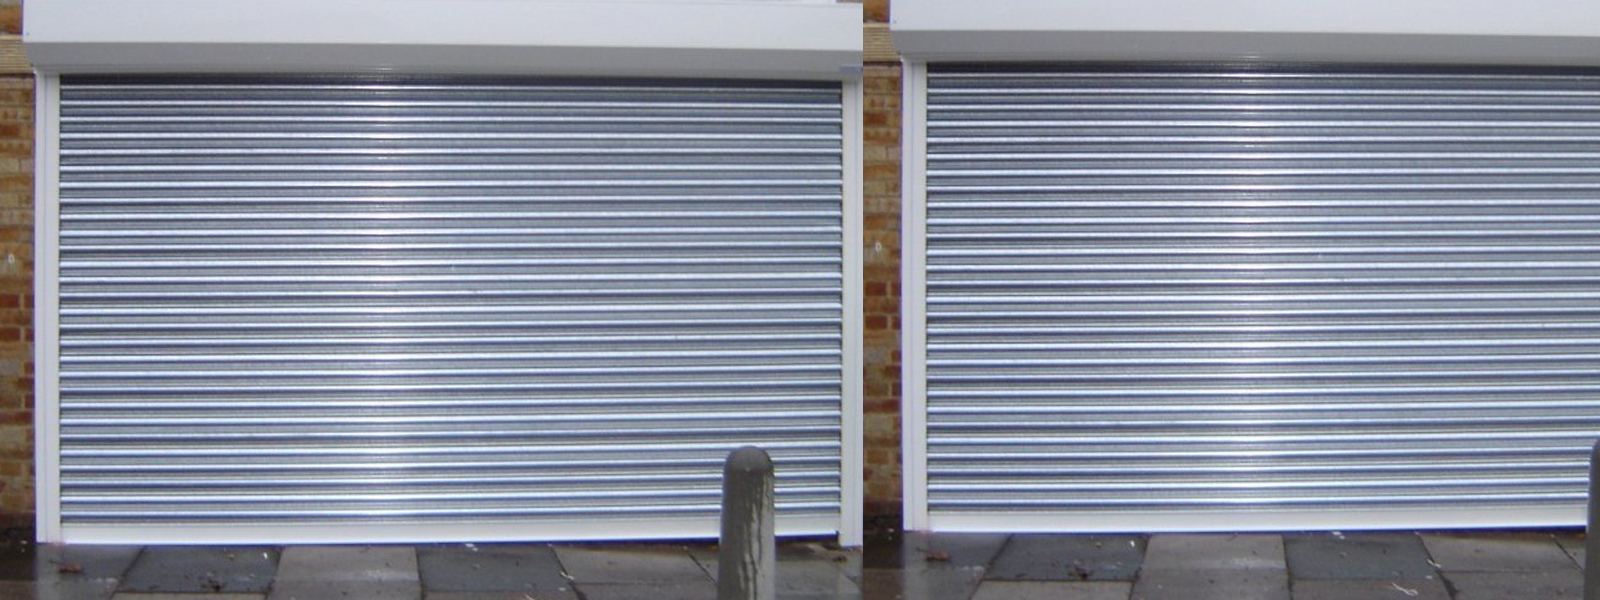 BRAND NEW GALVANISED/POWDER COATED ELECTRIC ROLLER SHUTTERS ALL SIZES! 